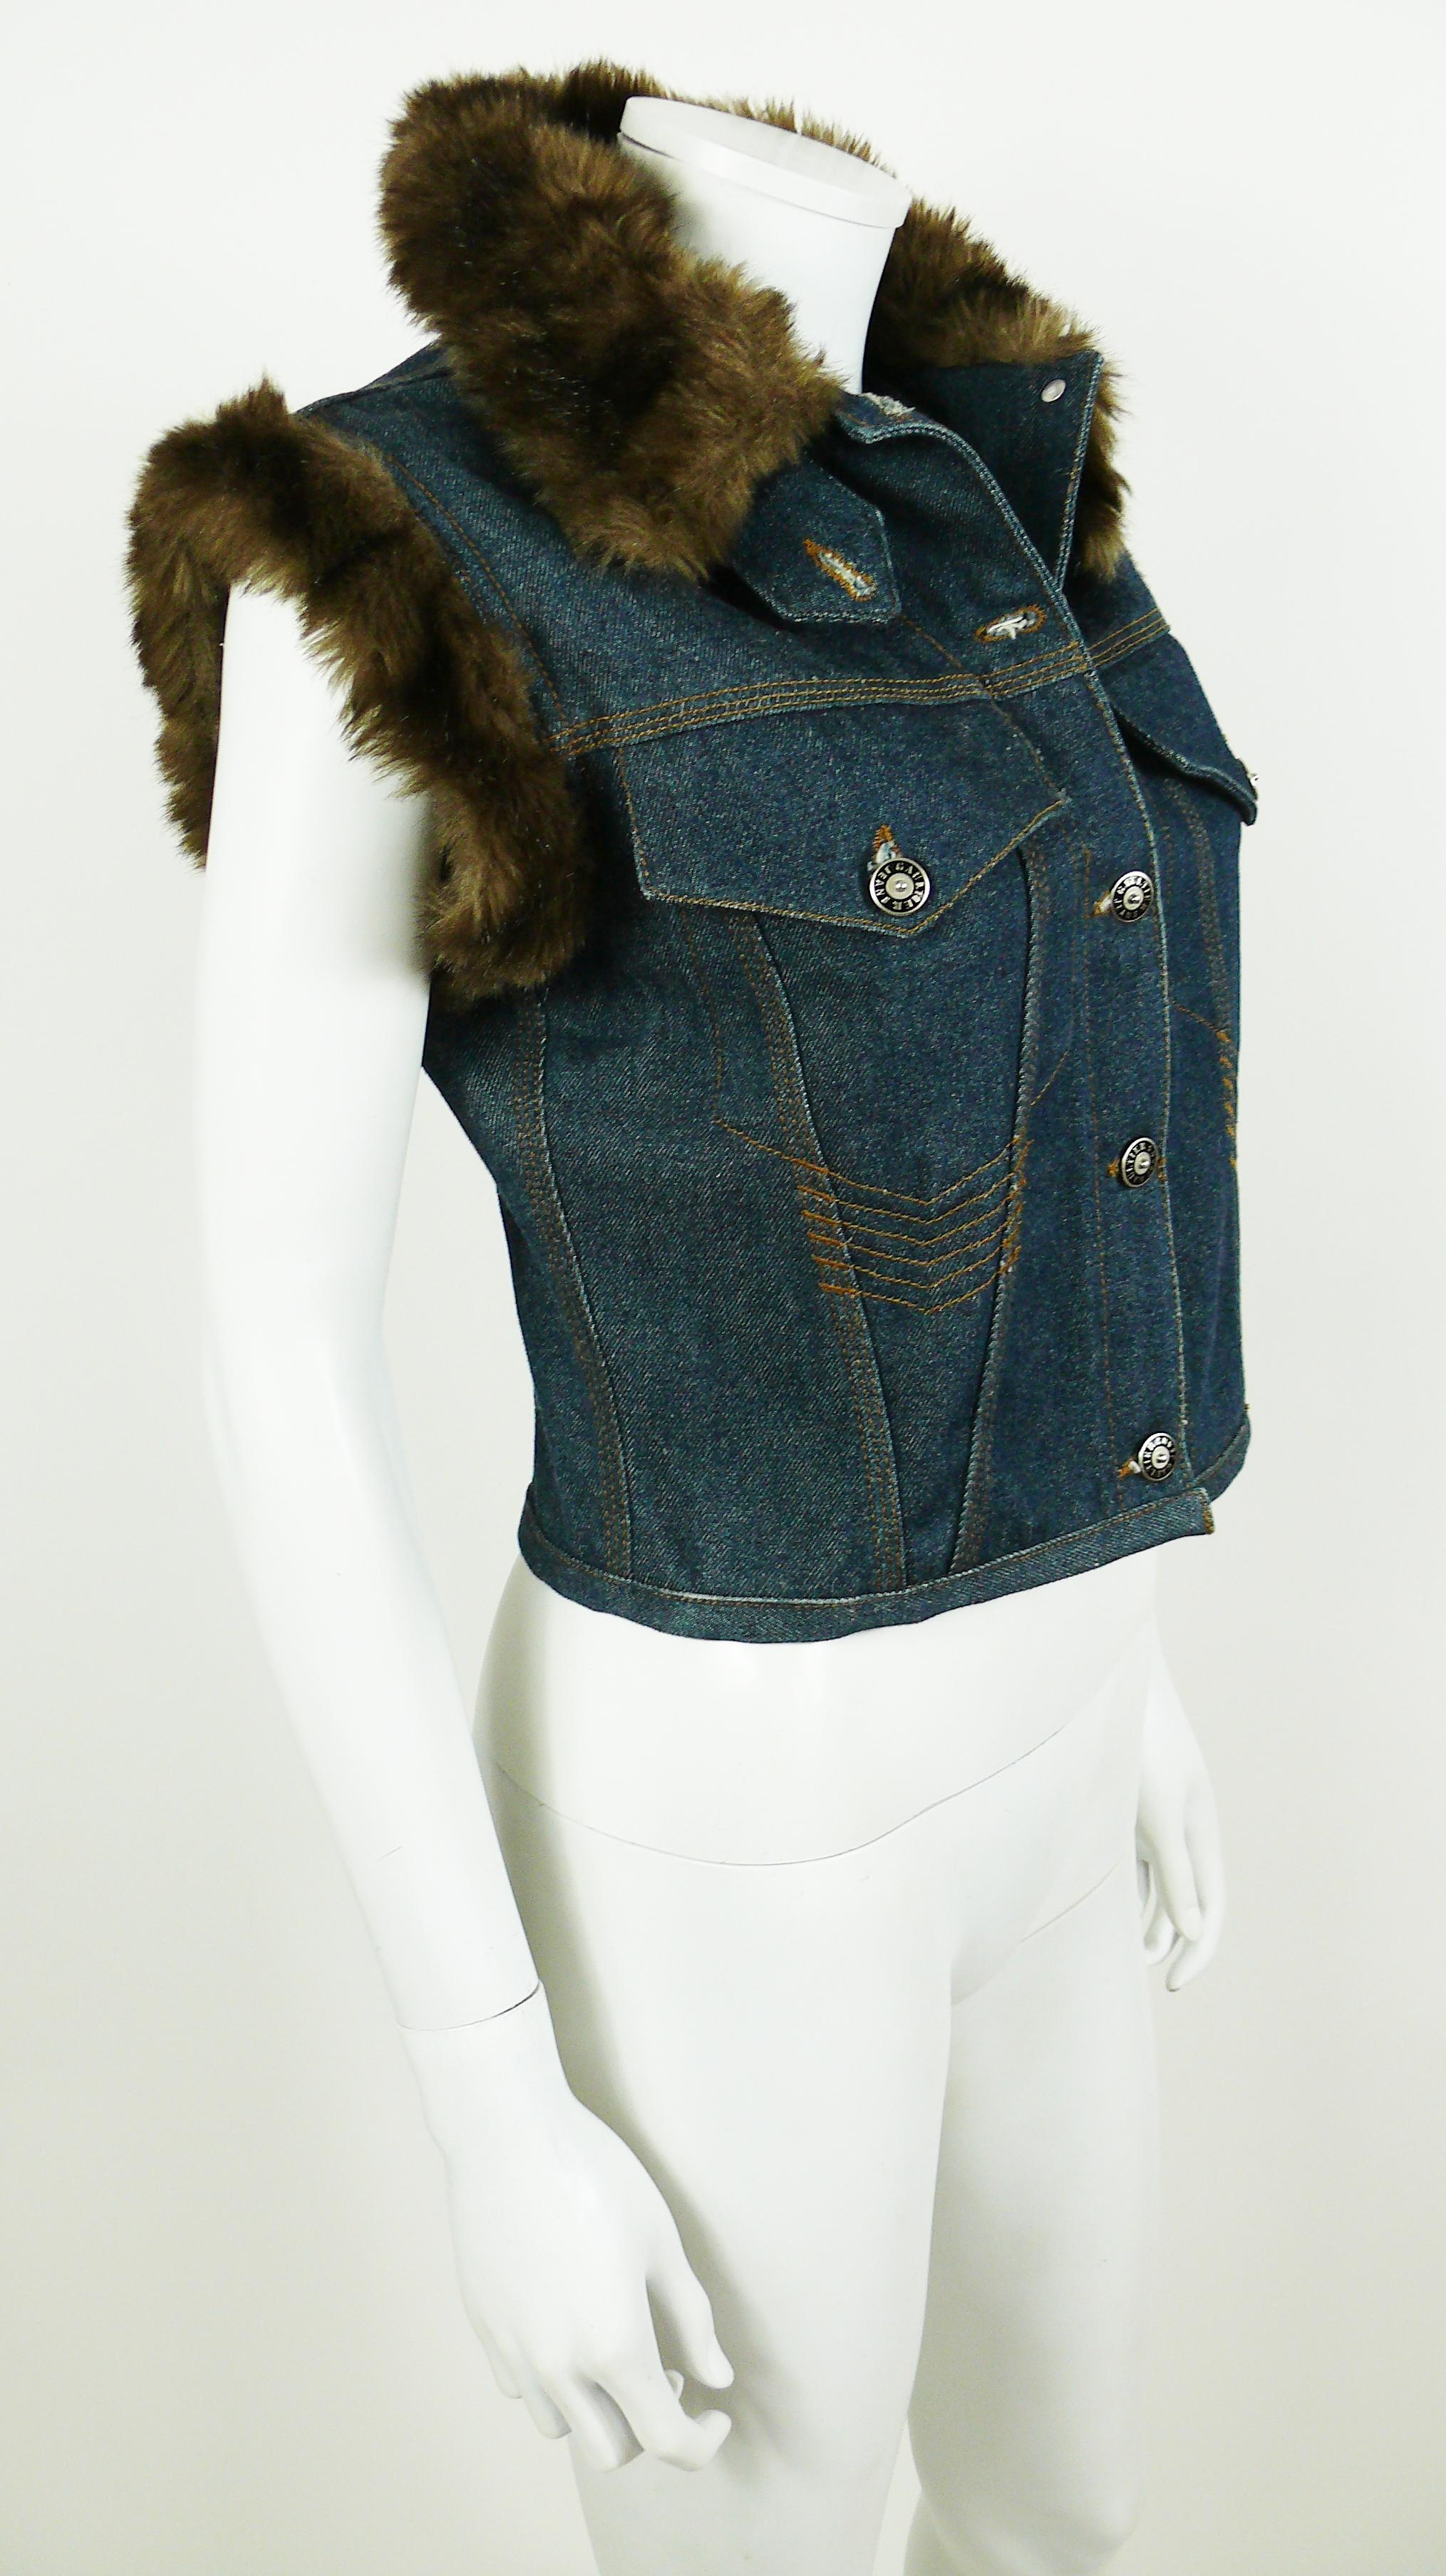 JEAN PAUL GAULTIER vintage denim sleeveless jacket.

This jacket features :
- Blue denim with faux fur trim on collar and shoulders.
- Signature GAULTIER JEANS silver toned buttons with black enamel.
- Two chest pockets.

Label reads GAULTIER